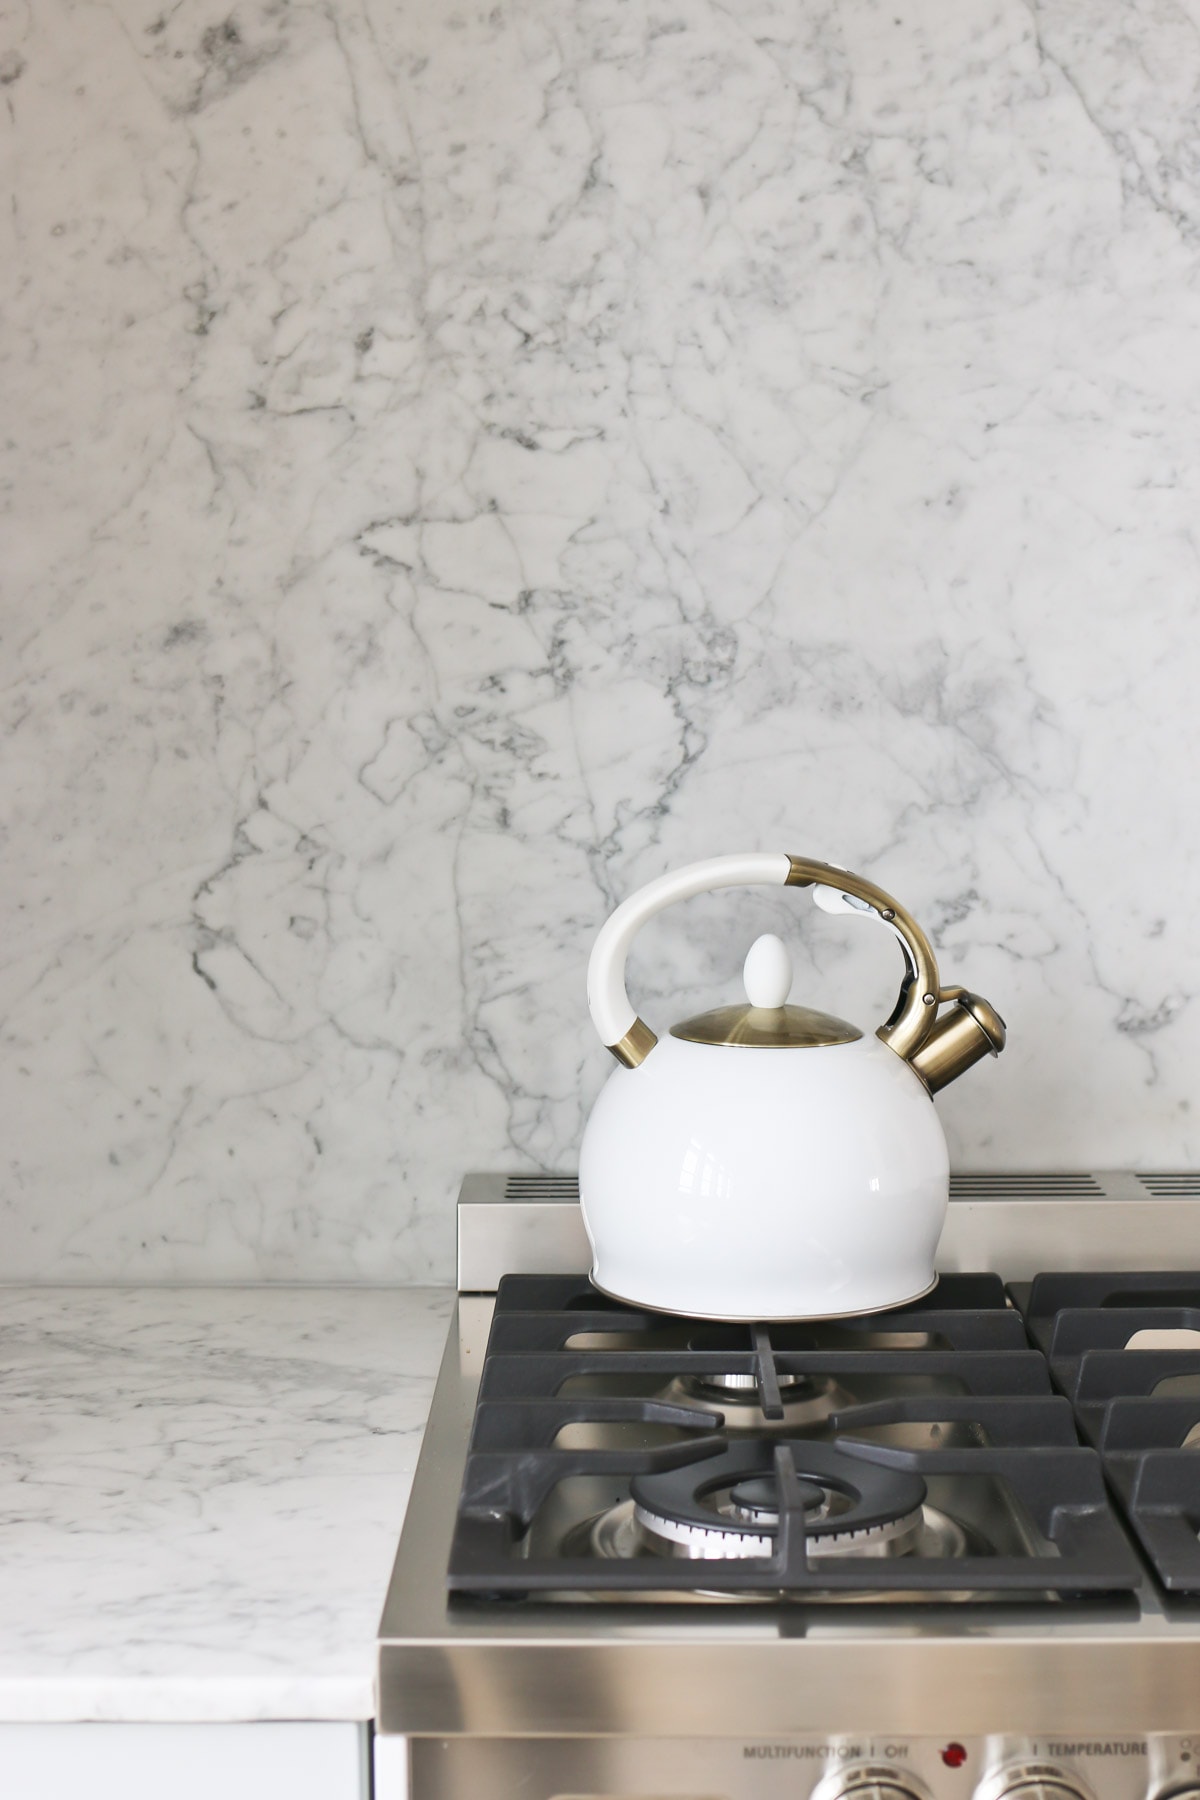 white kettle with gold accents on top of verona stove